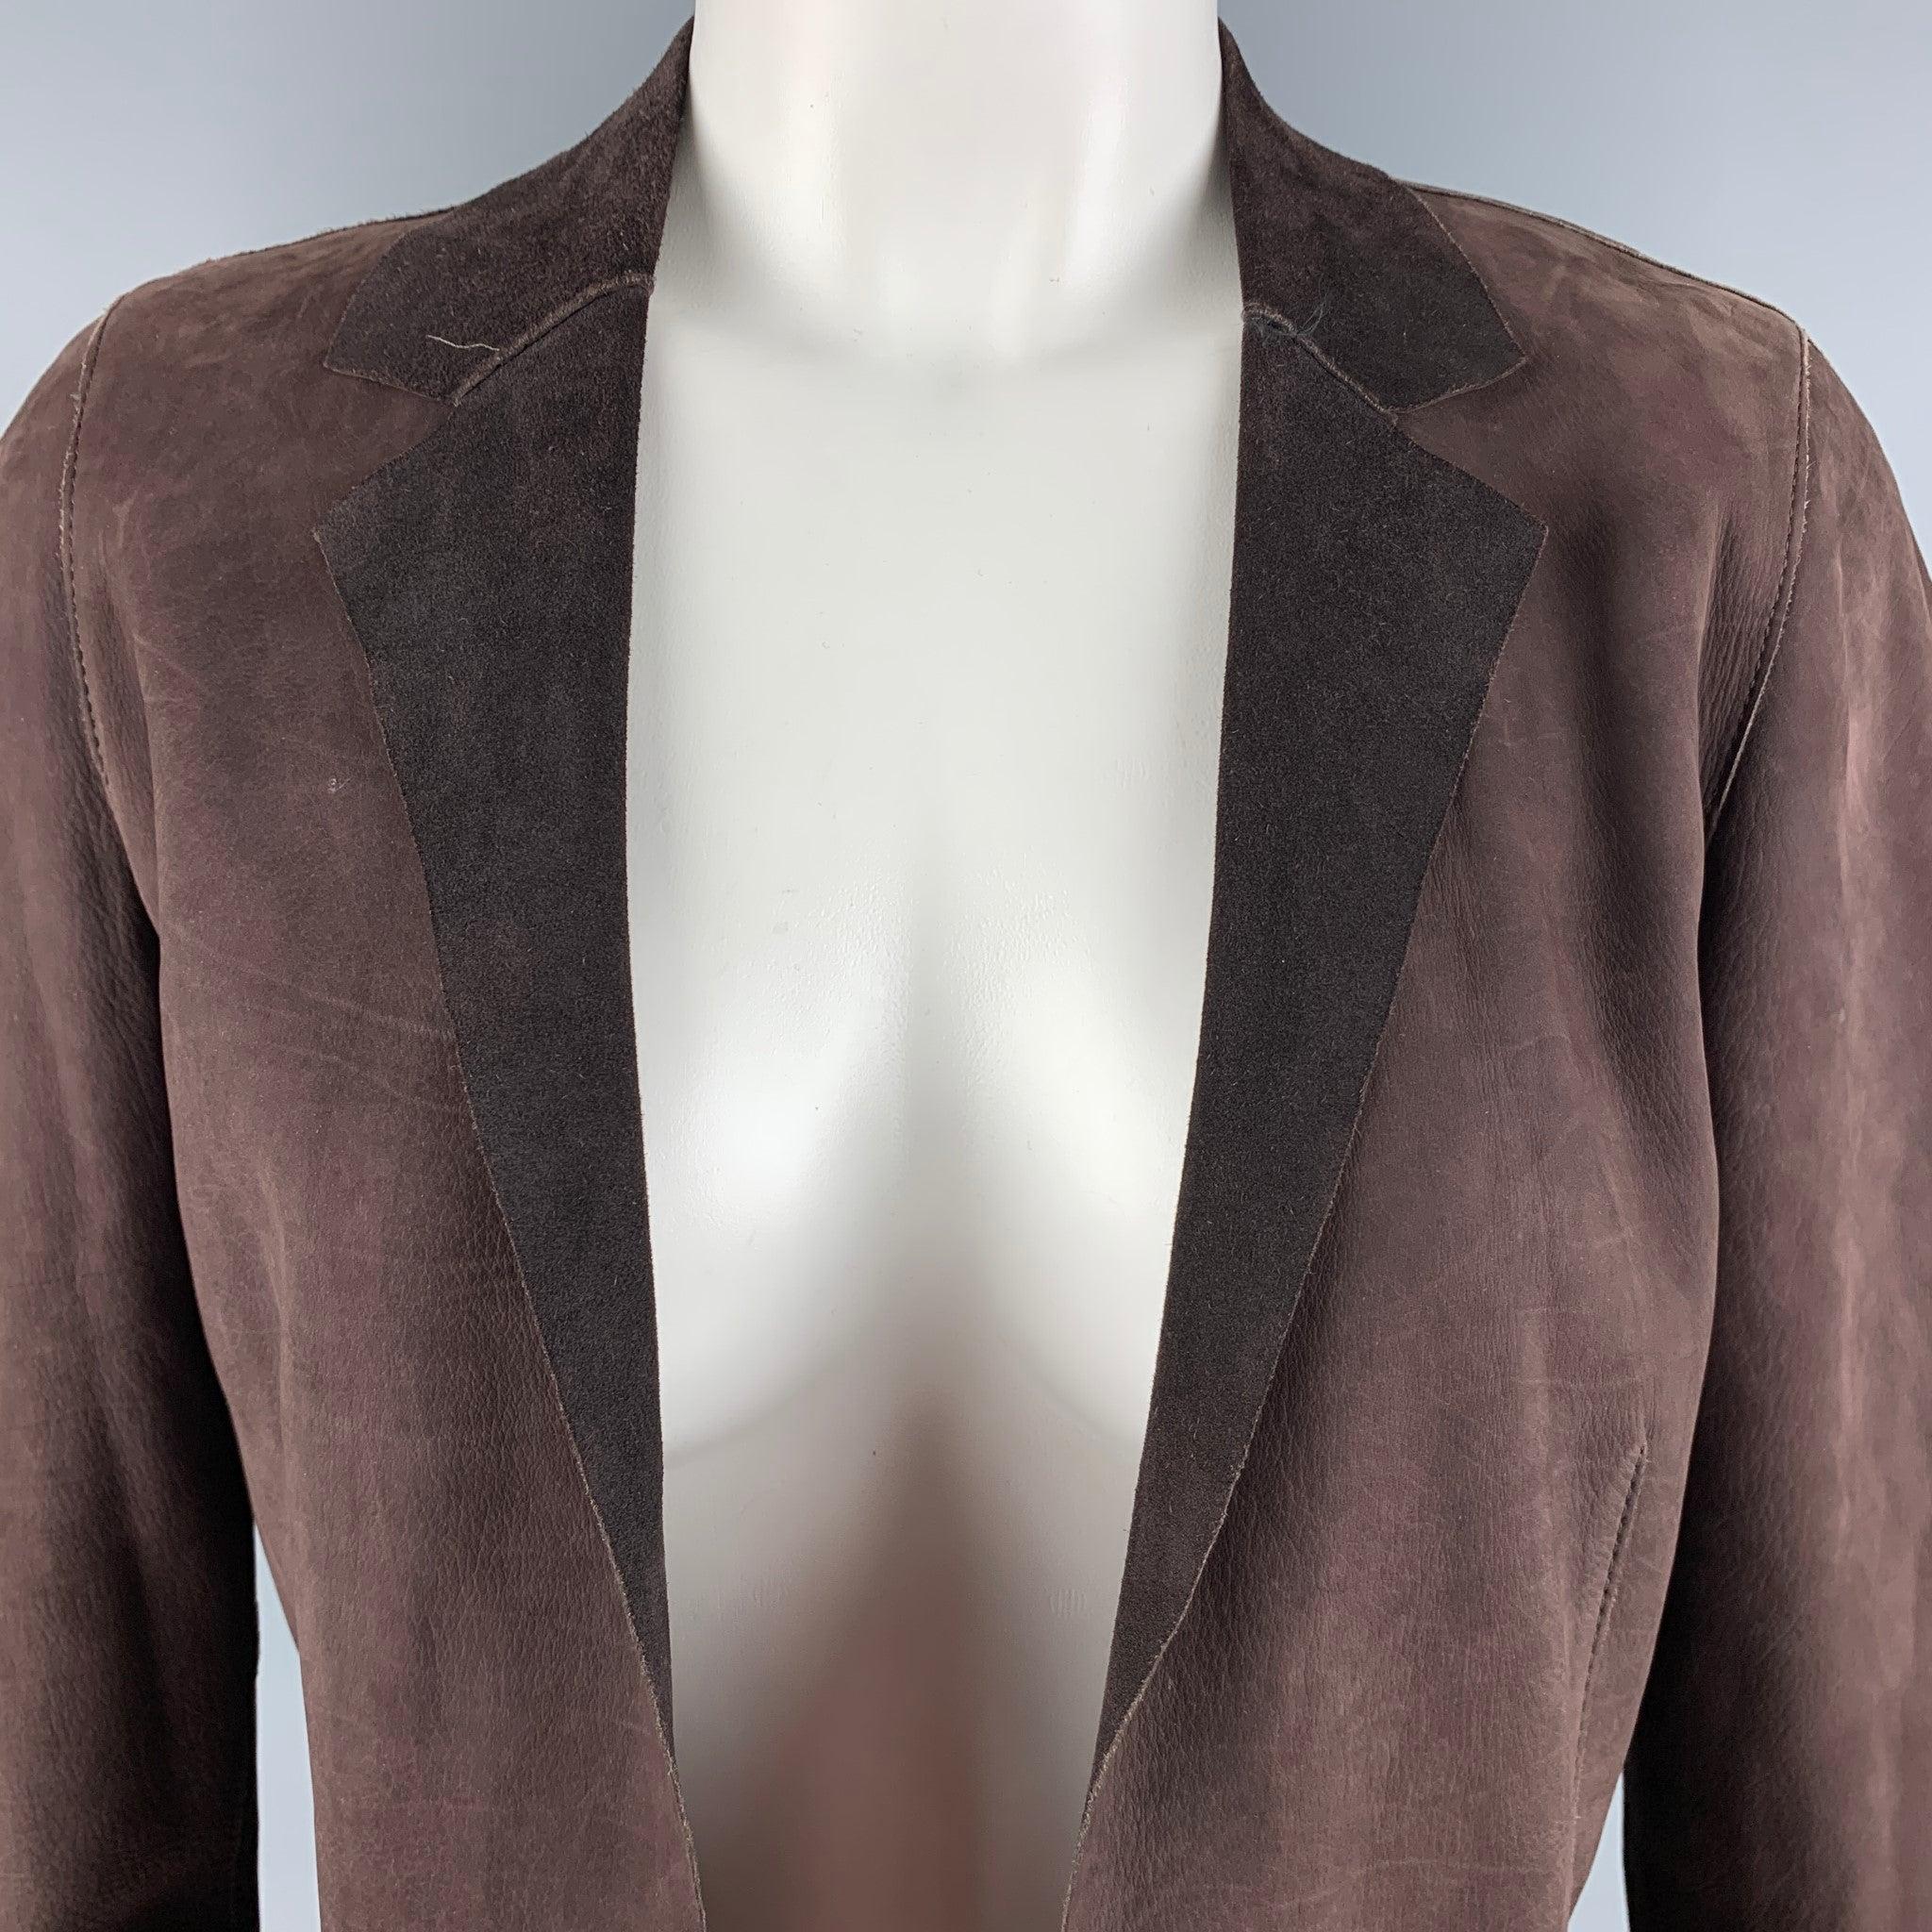 MARNI
coat in an unlined brown suede fabric featuring a notch lapel, two pockets, and an open front. Made in Italy.Very Good Pre-Owned Condition. Moderate signs of wear. 

Marked:  40 

Measurements: 
 
Shoulder: 15.5 inches Bust: 33 inches Sleeve: